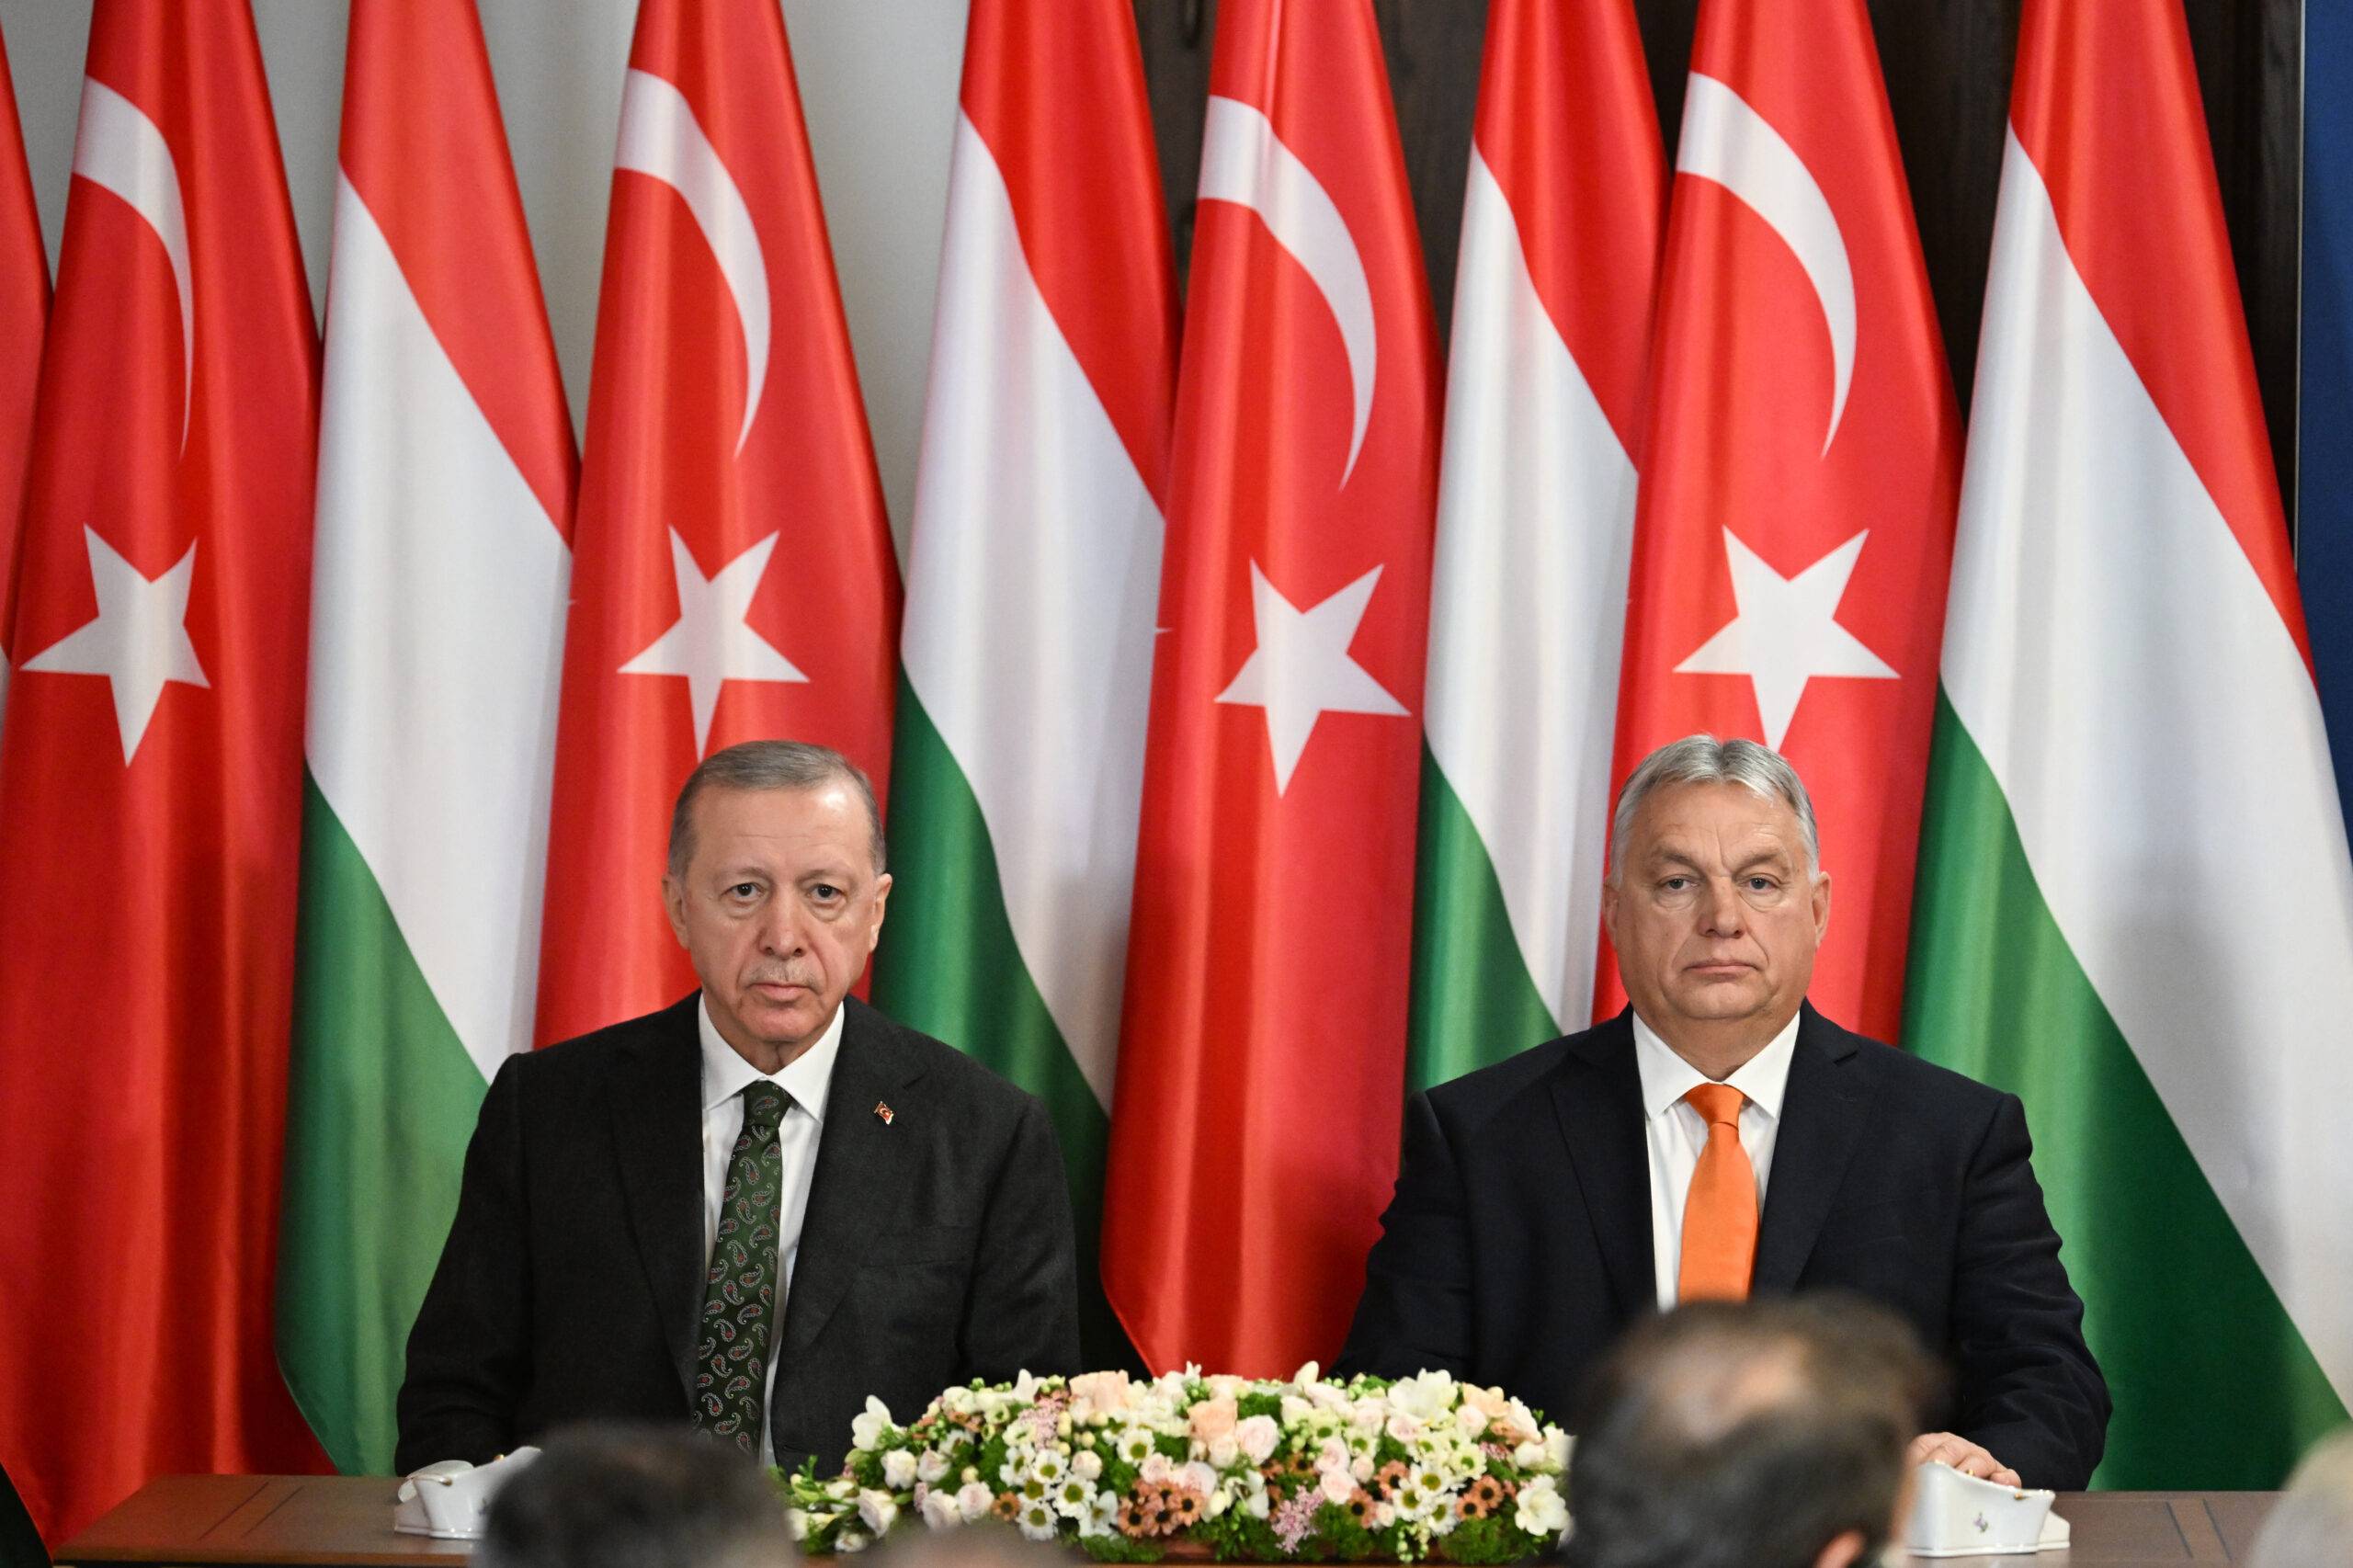 Turkish President Recep Tayyip Erdogan (L) and Hungarian Prime Minister Viktor Orban (R) sign bilateral agreements between Turkiye and Hungary following the meeting of delegations in Budapest, Hungary on December 18, 2023 [Emrah Yorulmaz - Anadolu Agency]